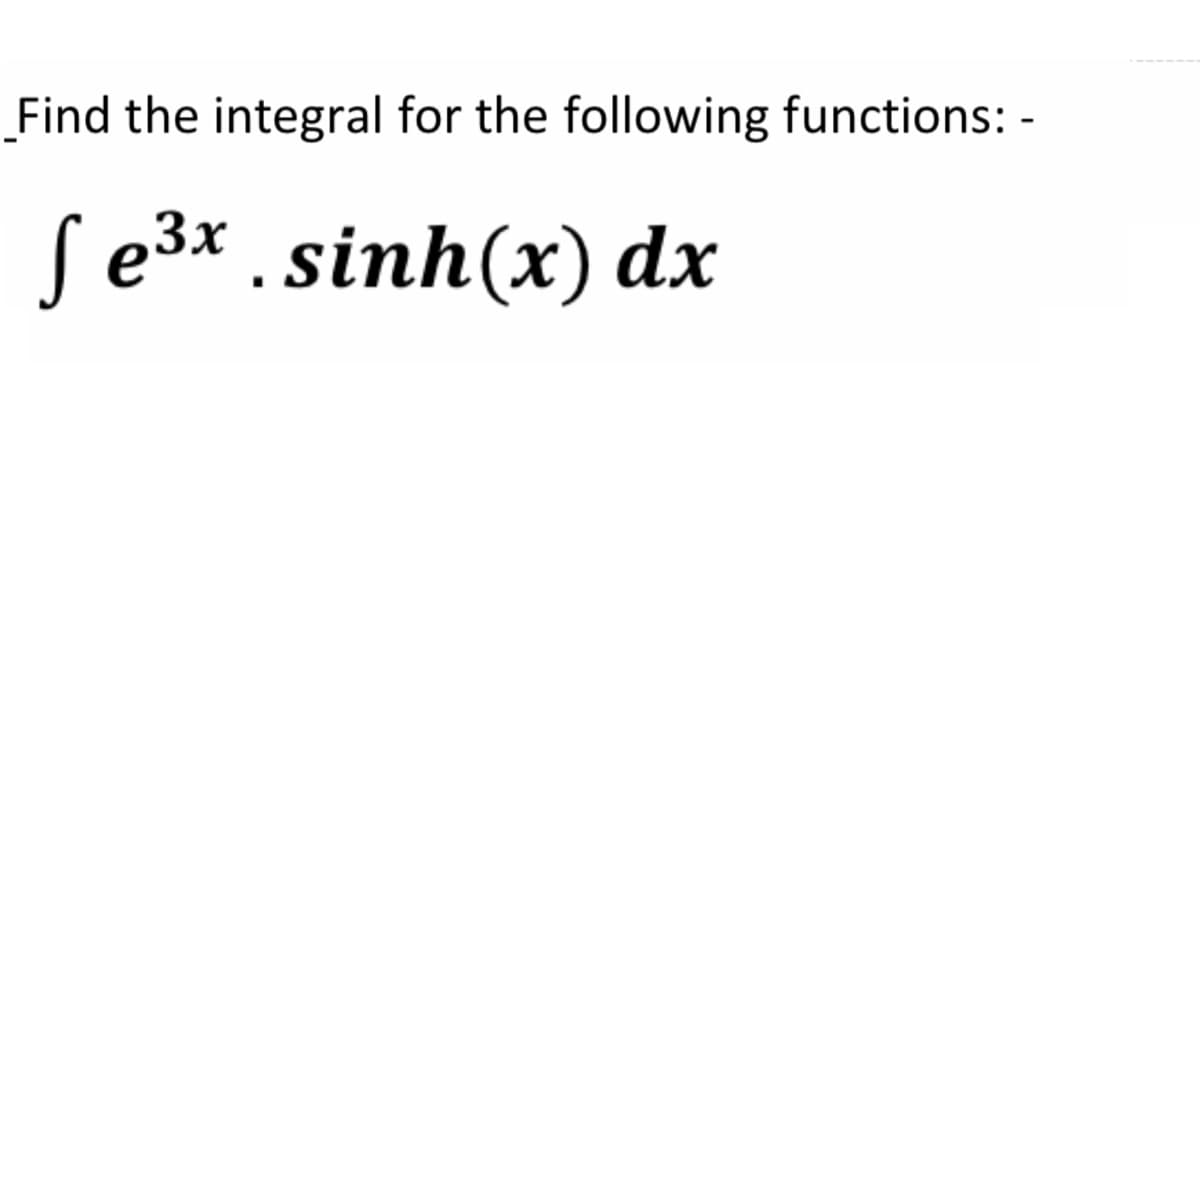 Find the integral for the following functions: -
S e3x . sinh(x) dx
